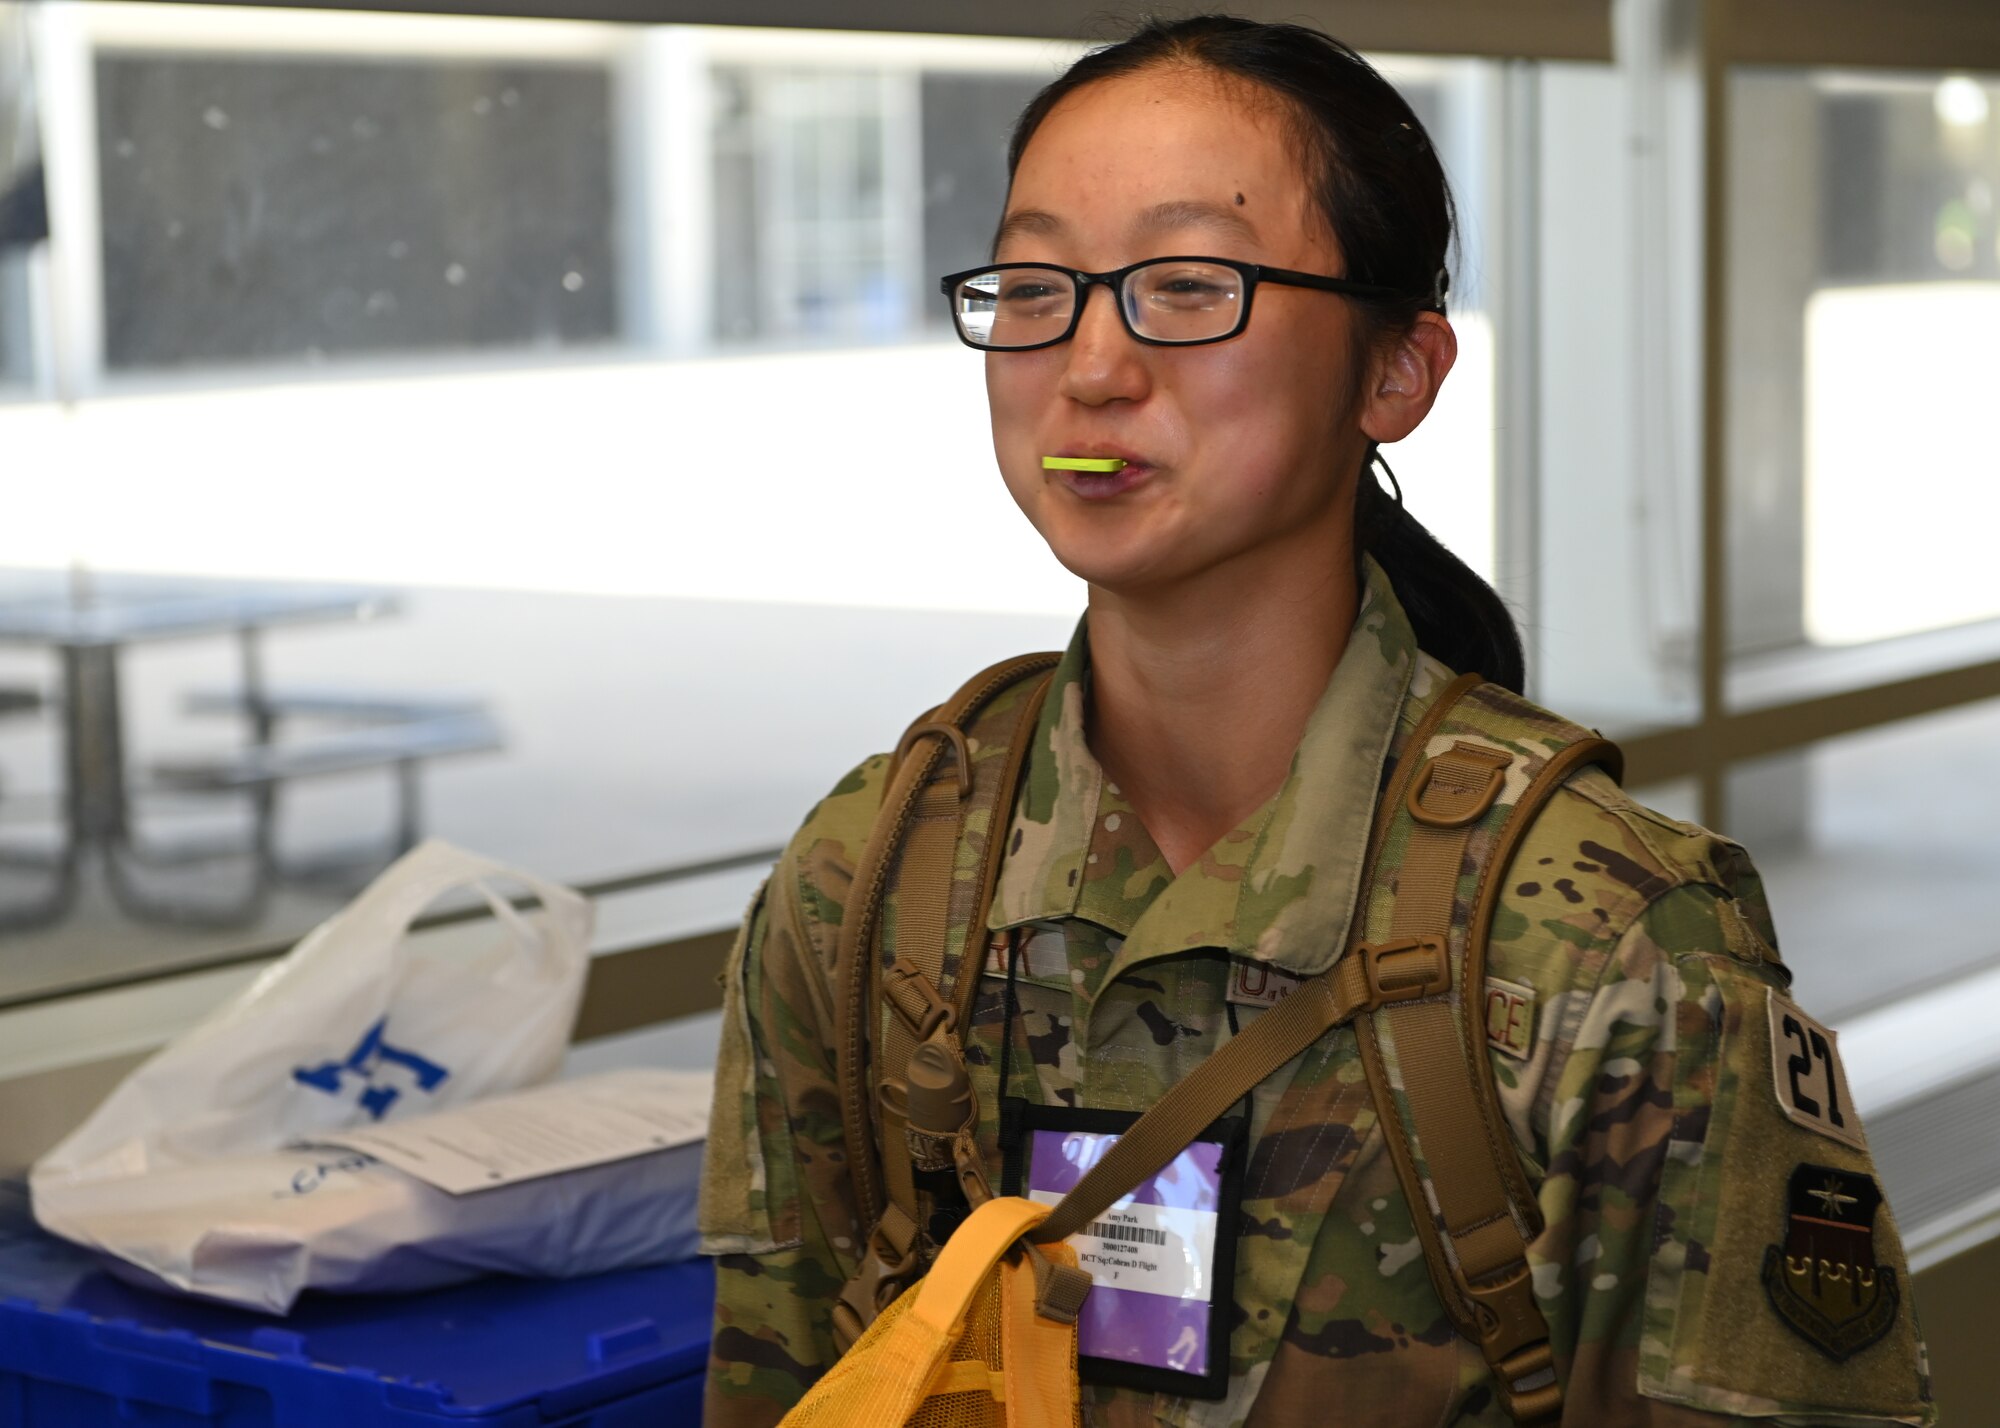 A basic cadet bites down on a mouth guard at the final station of dental in-processing at the U.S. Air Force Academy’s Cadet Dental Clinic, July 10, 2023. Dental lab technicians fitted more than 1,000 basic cadets with mouth guards prior to field training at Jacks Valley.